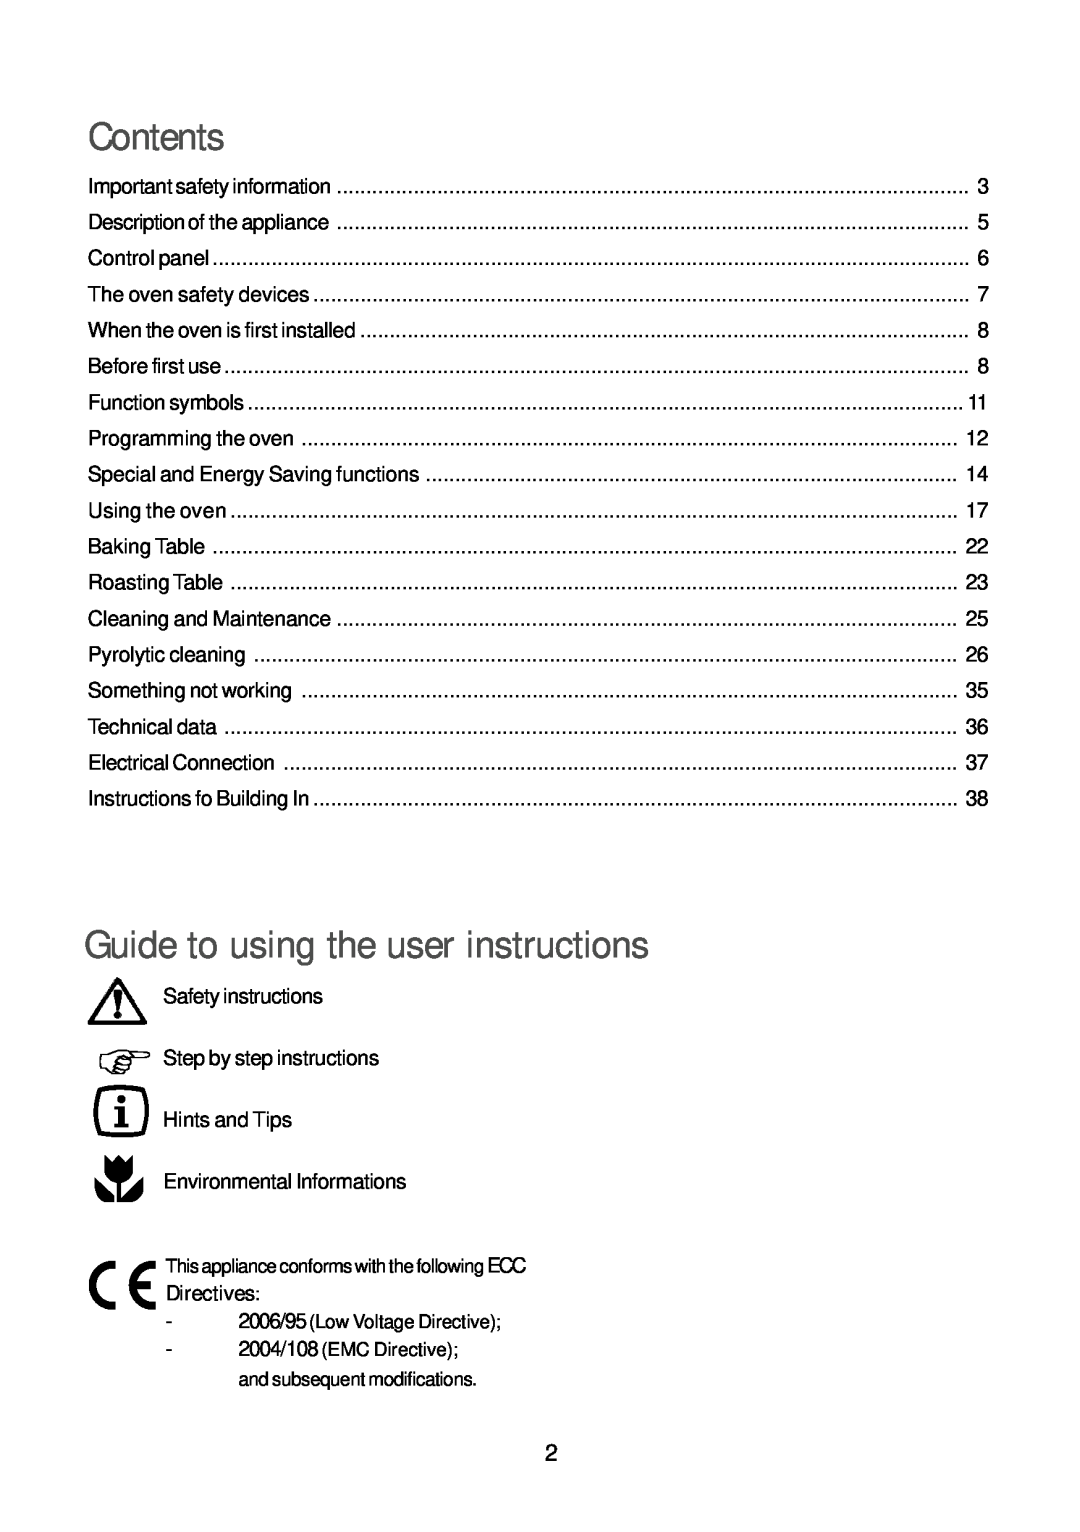 John Lewis JLBIOS664 Contents, Guide to using the user instructions, Safety instructions, Environmental Informations 